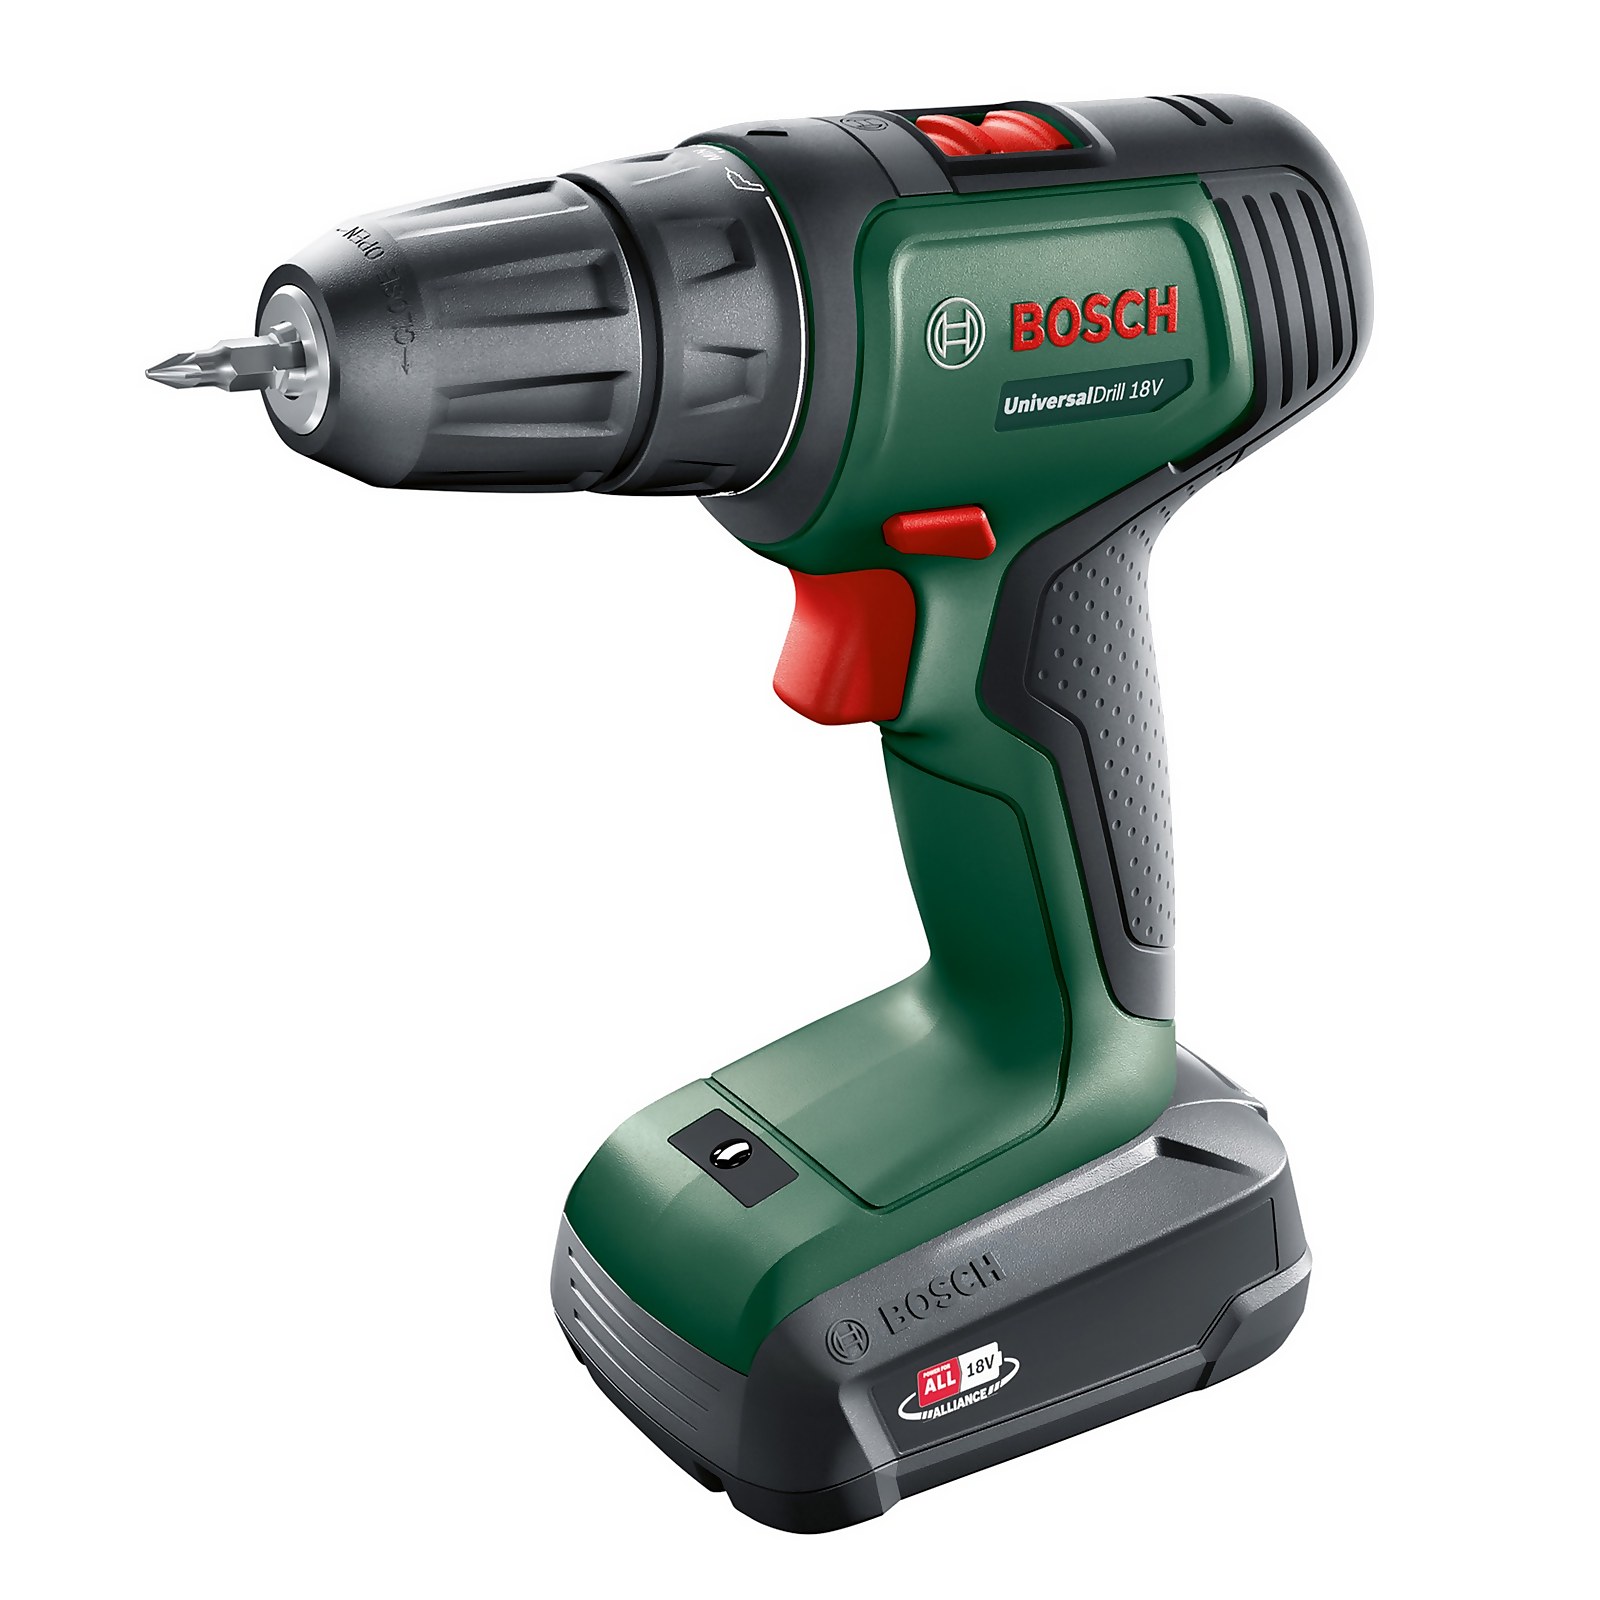 Photo of Bosch Universaldrill 18v With 1 X 1.5ah Battery & Charger